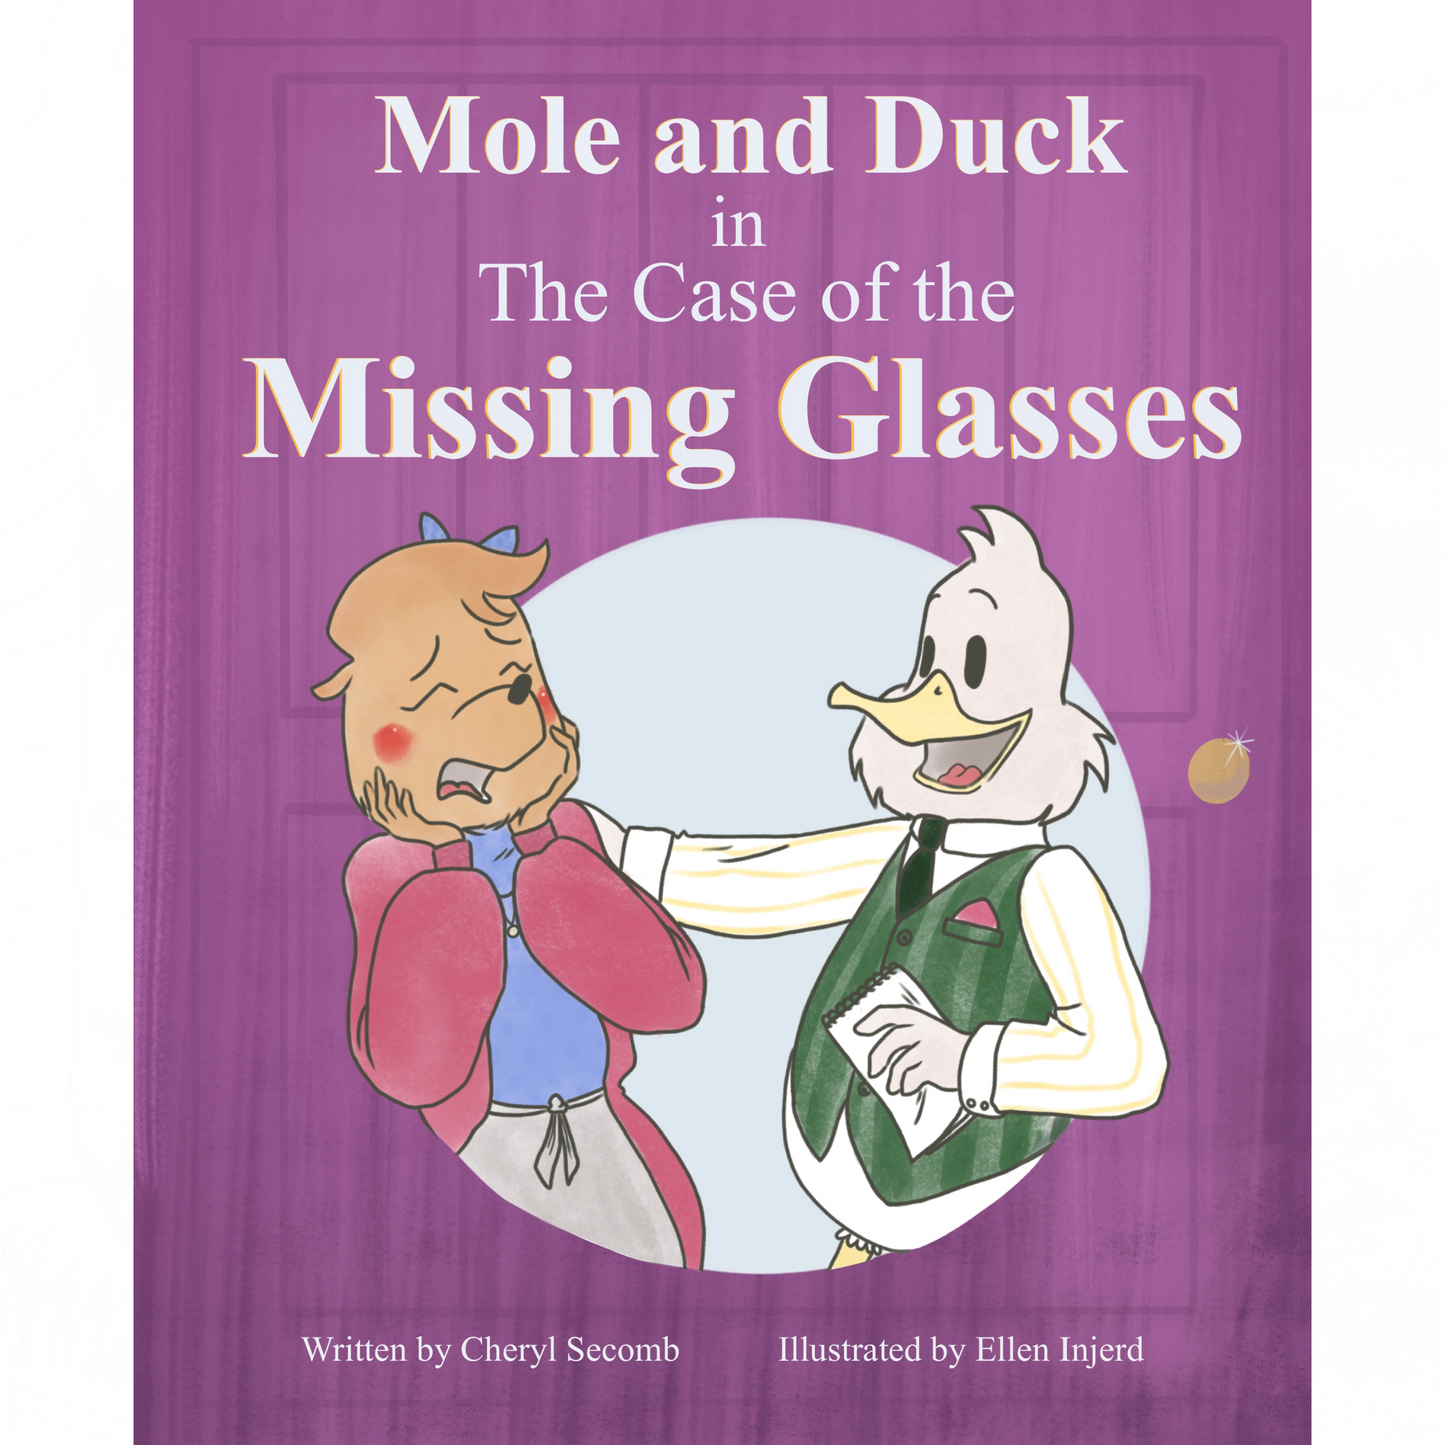 Mole and Duck/Case of the Missing Glasses